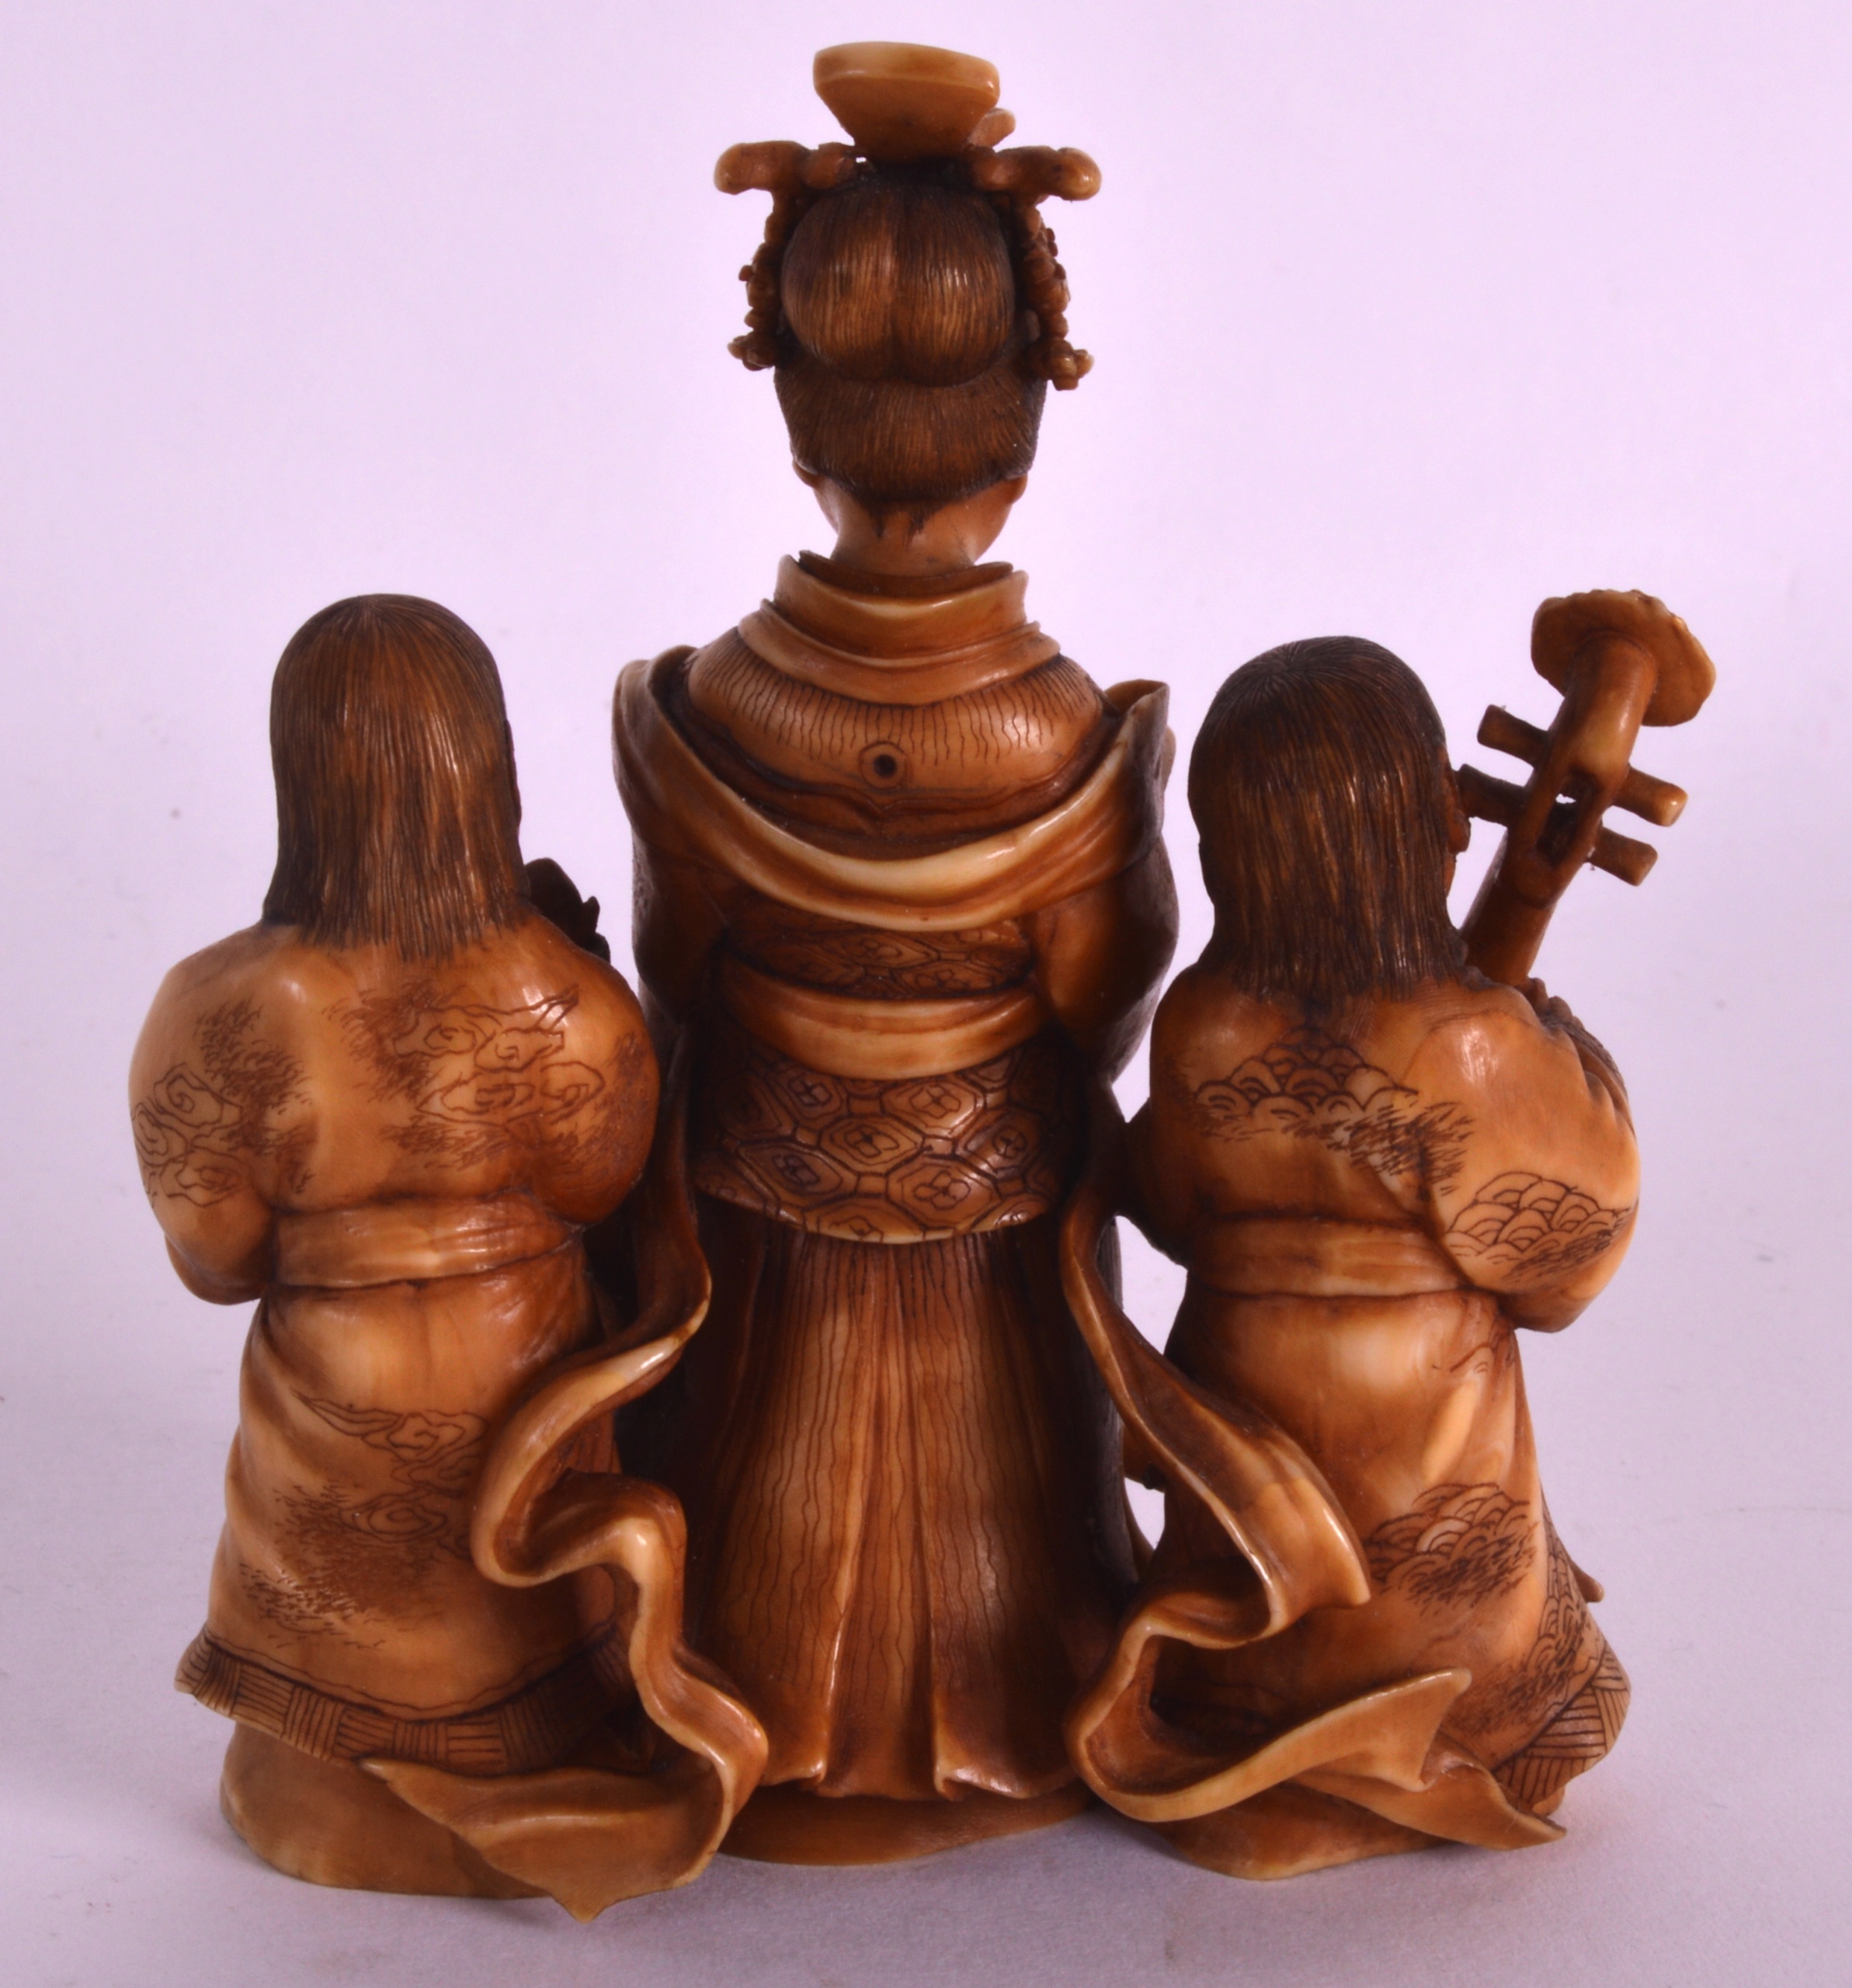 A LOVELY 19TH CENTURY JAPANESE MEIJI PERIOD CARVED IVORY OKIMONO modelled as a mother and children - Image 2 of 3